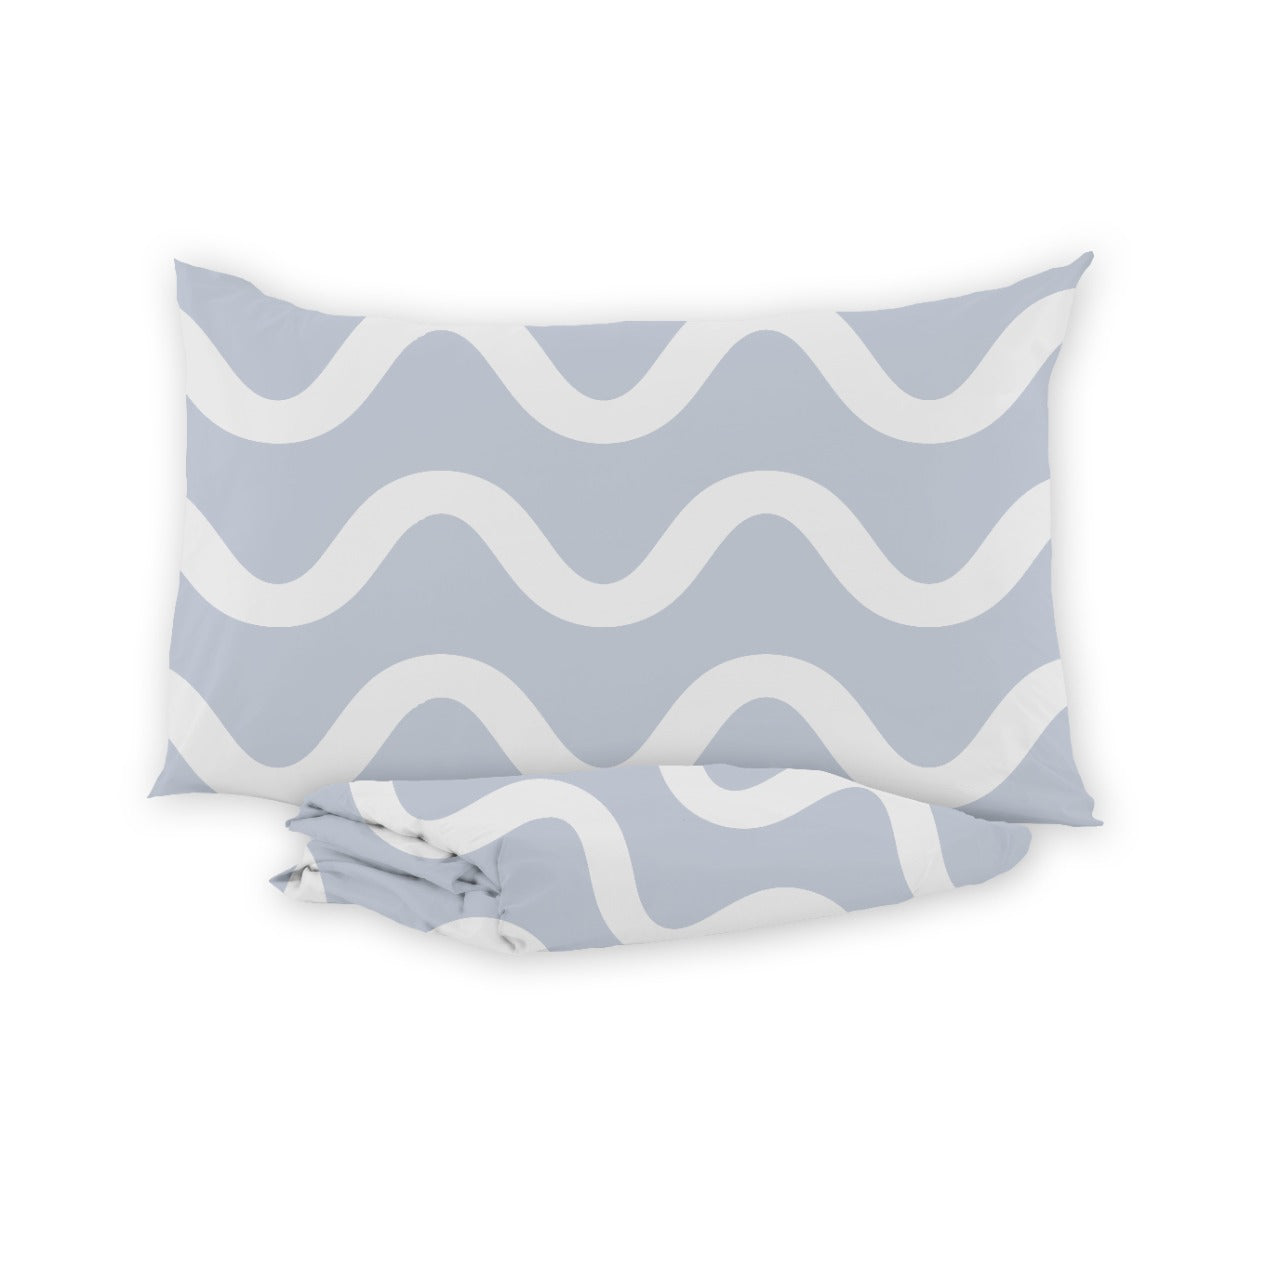 Rando- Printed Fitted Cotton Sheet Set (Linen & 2 Pillow cases)